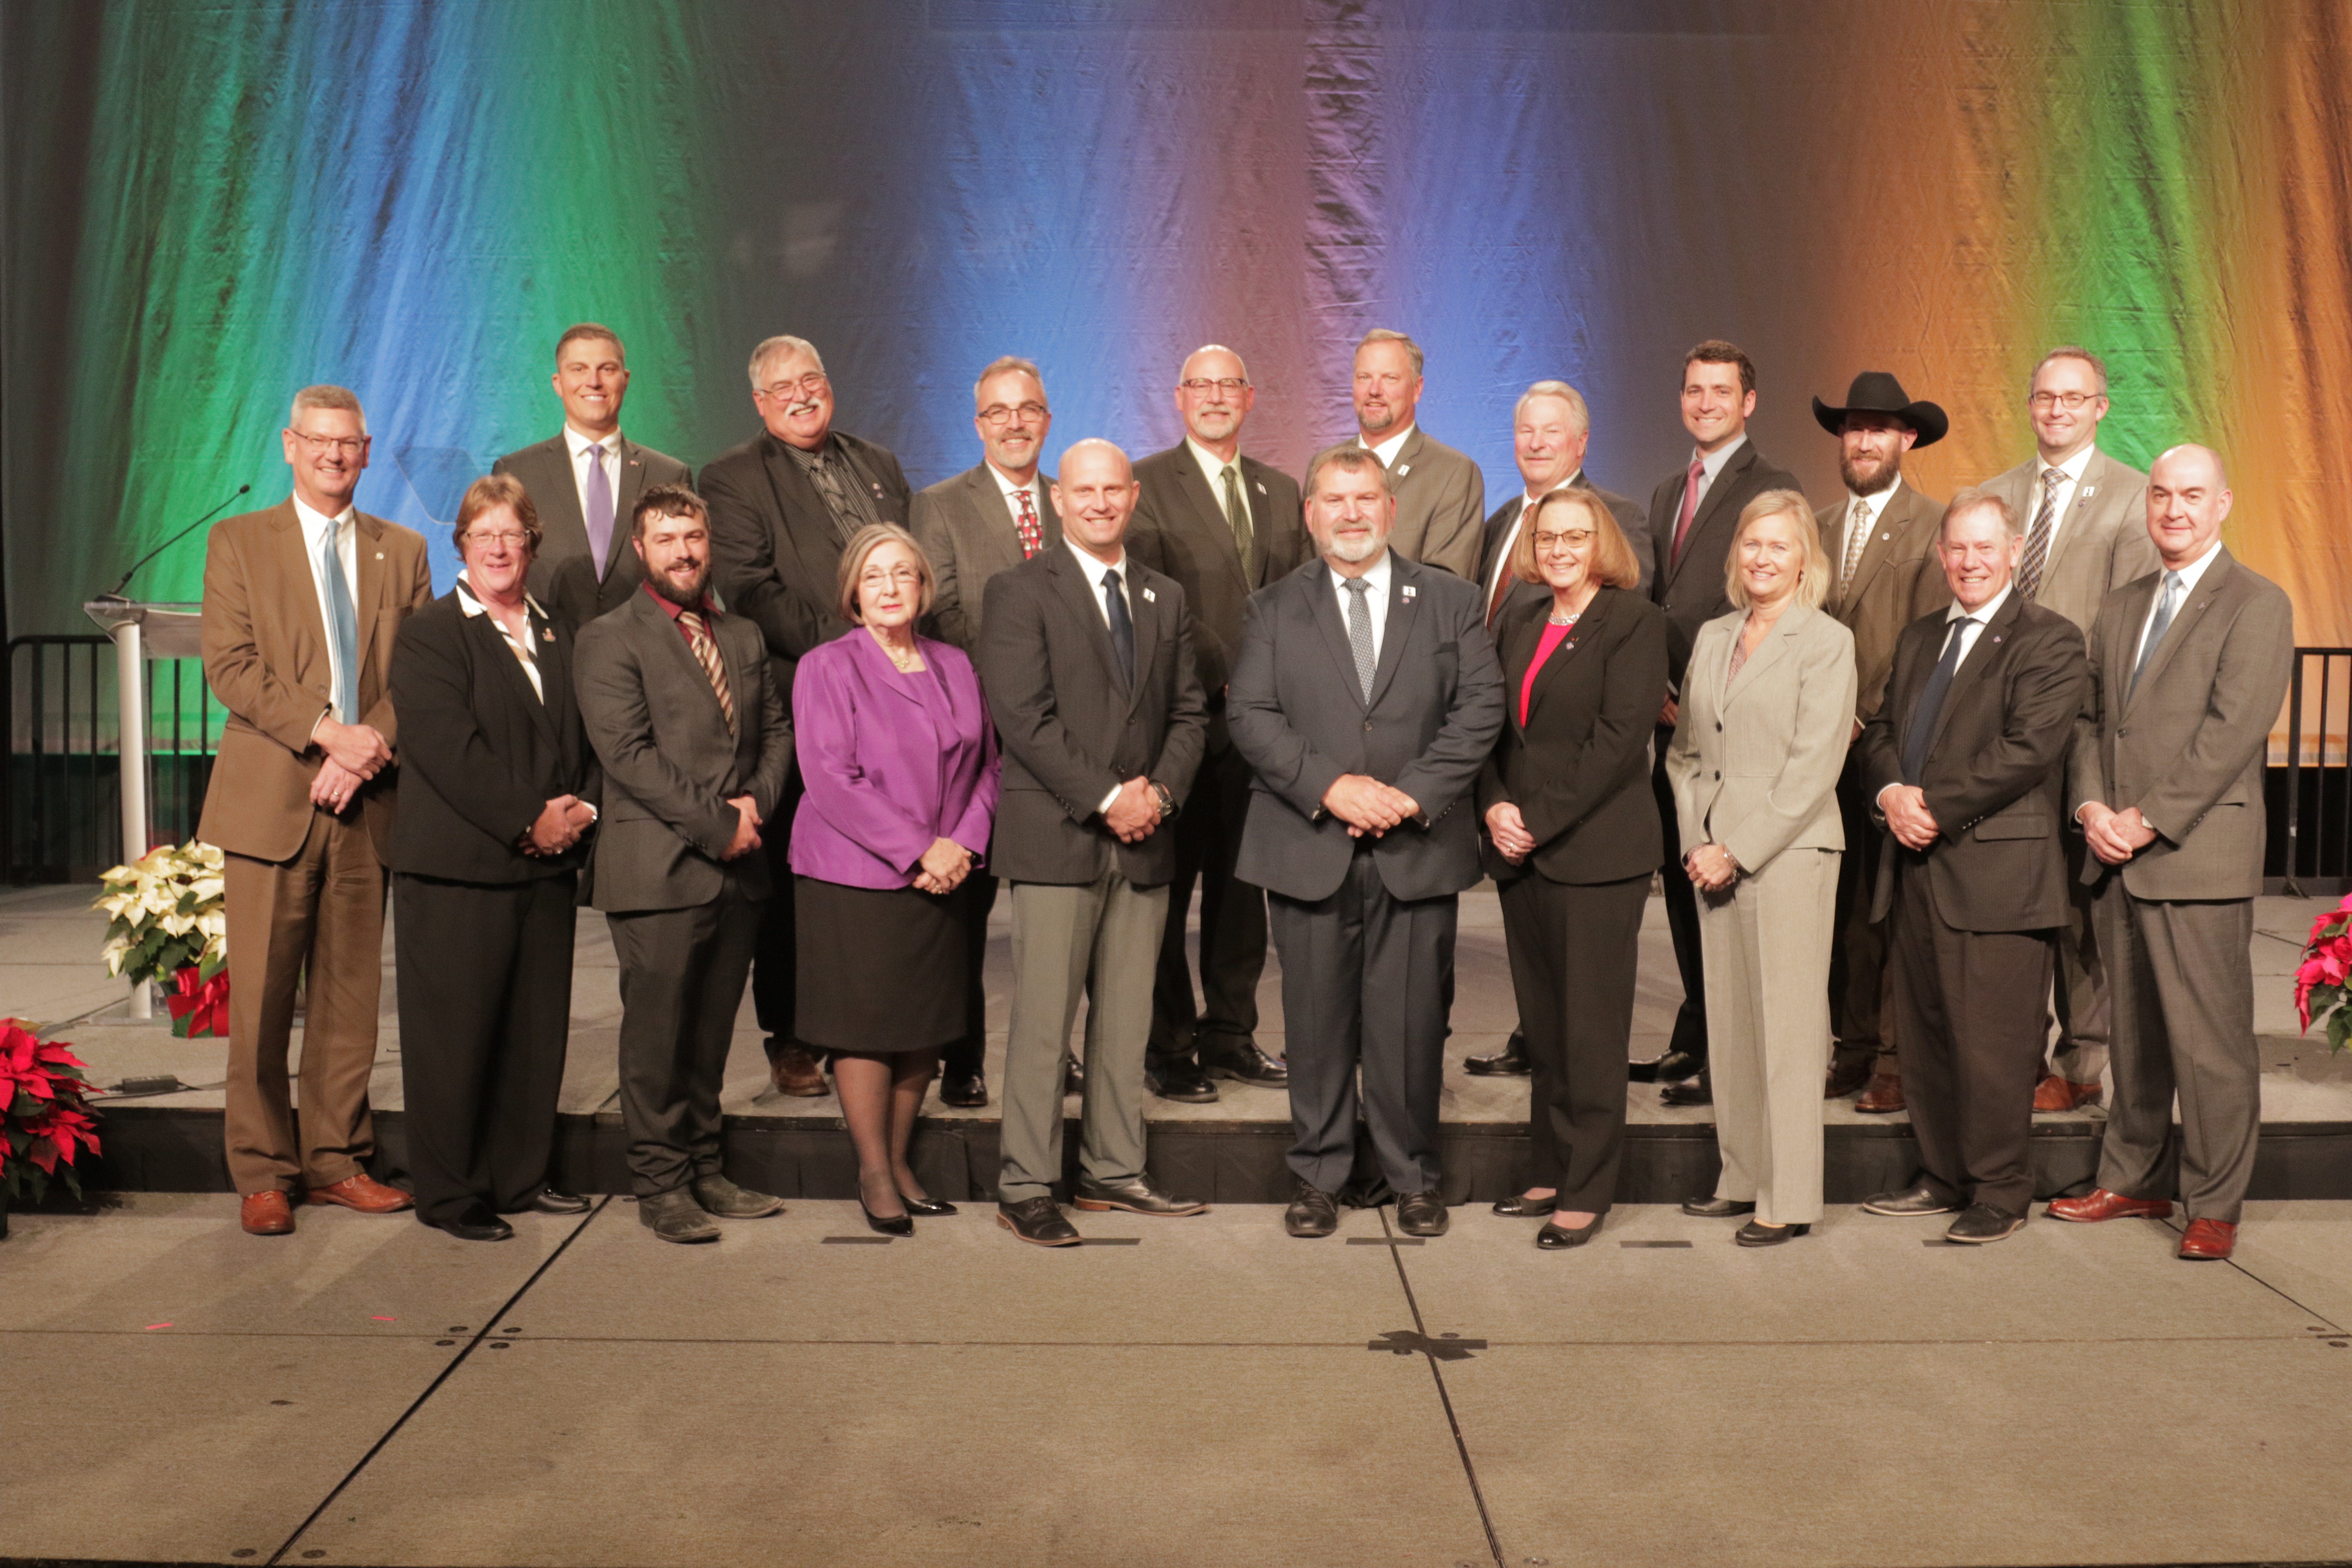 The 2022-23 MFB Board posing for a photo against a colorful backdrop at the 2022 Michigan Farm Bureau State Annual Meeting.